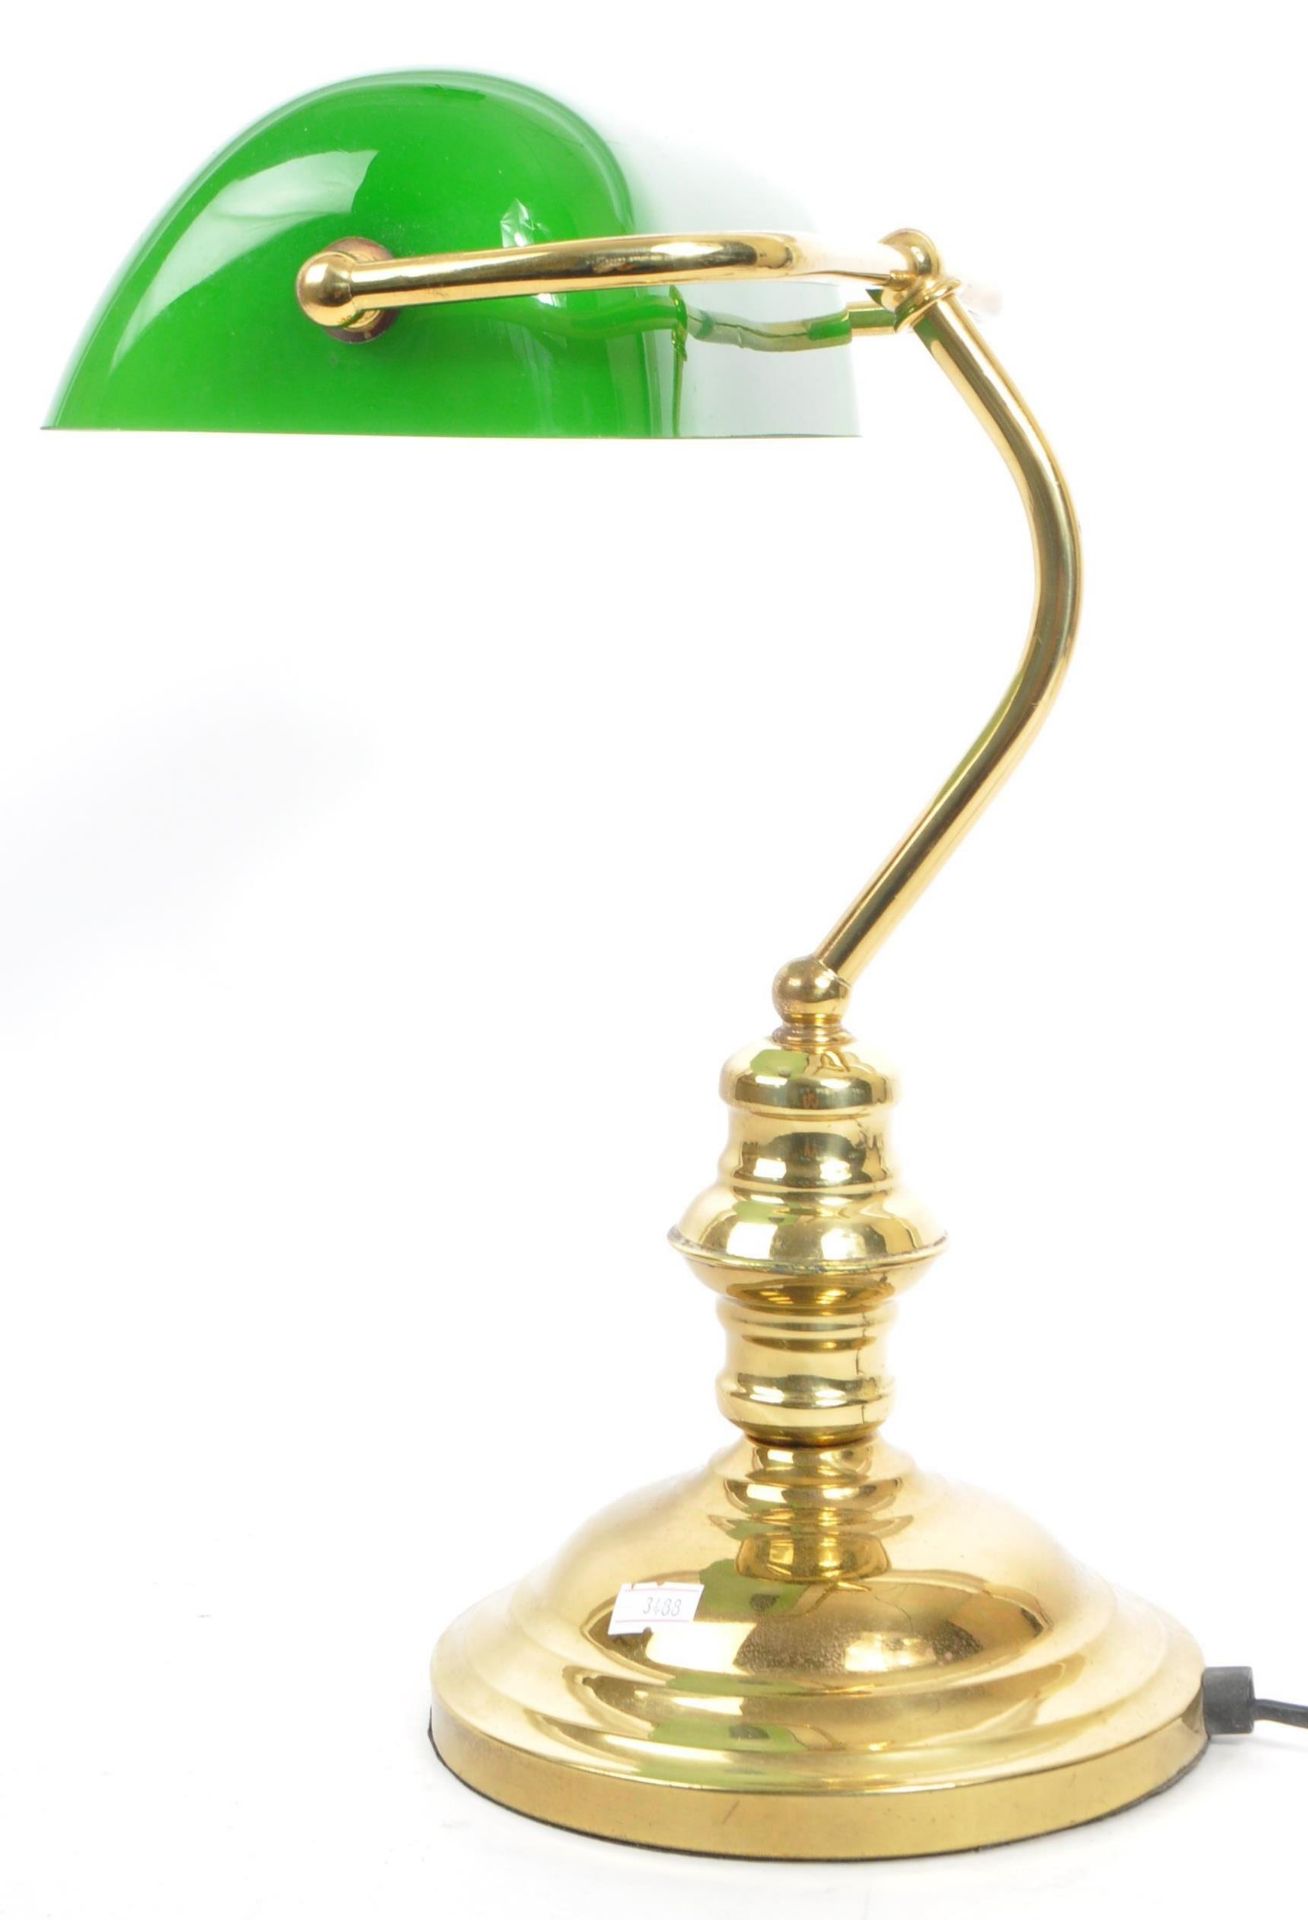 RETRO LATE 20TH CENTURY REPRODUCTION BANKER'S LAMP - Image 3 of 5